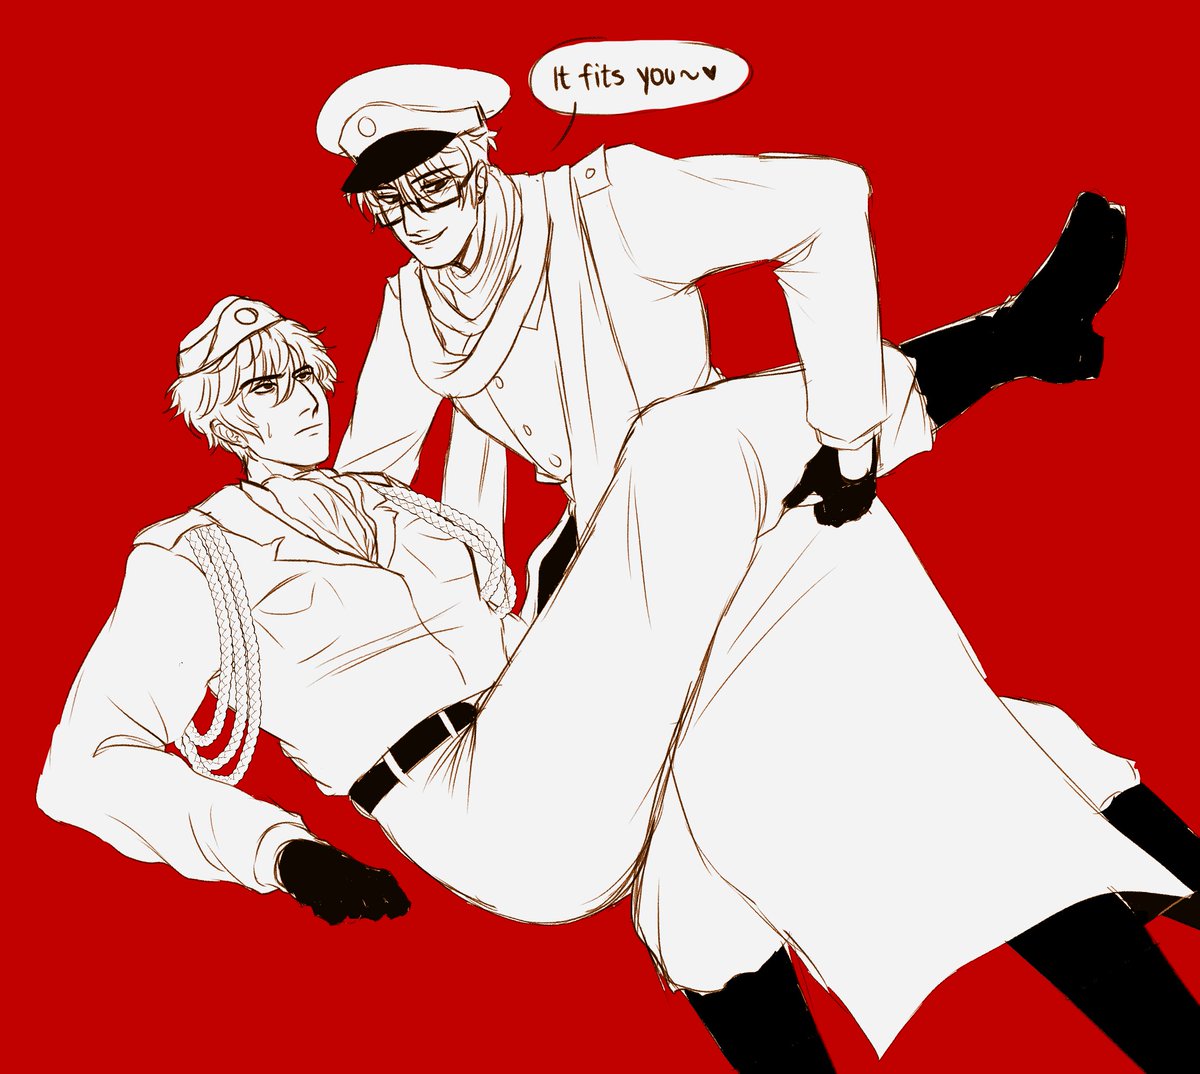 3. Like. anon on Tumblr requested them to switch uniforms. pic.twitter.com/...